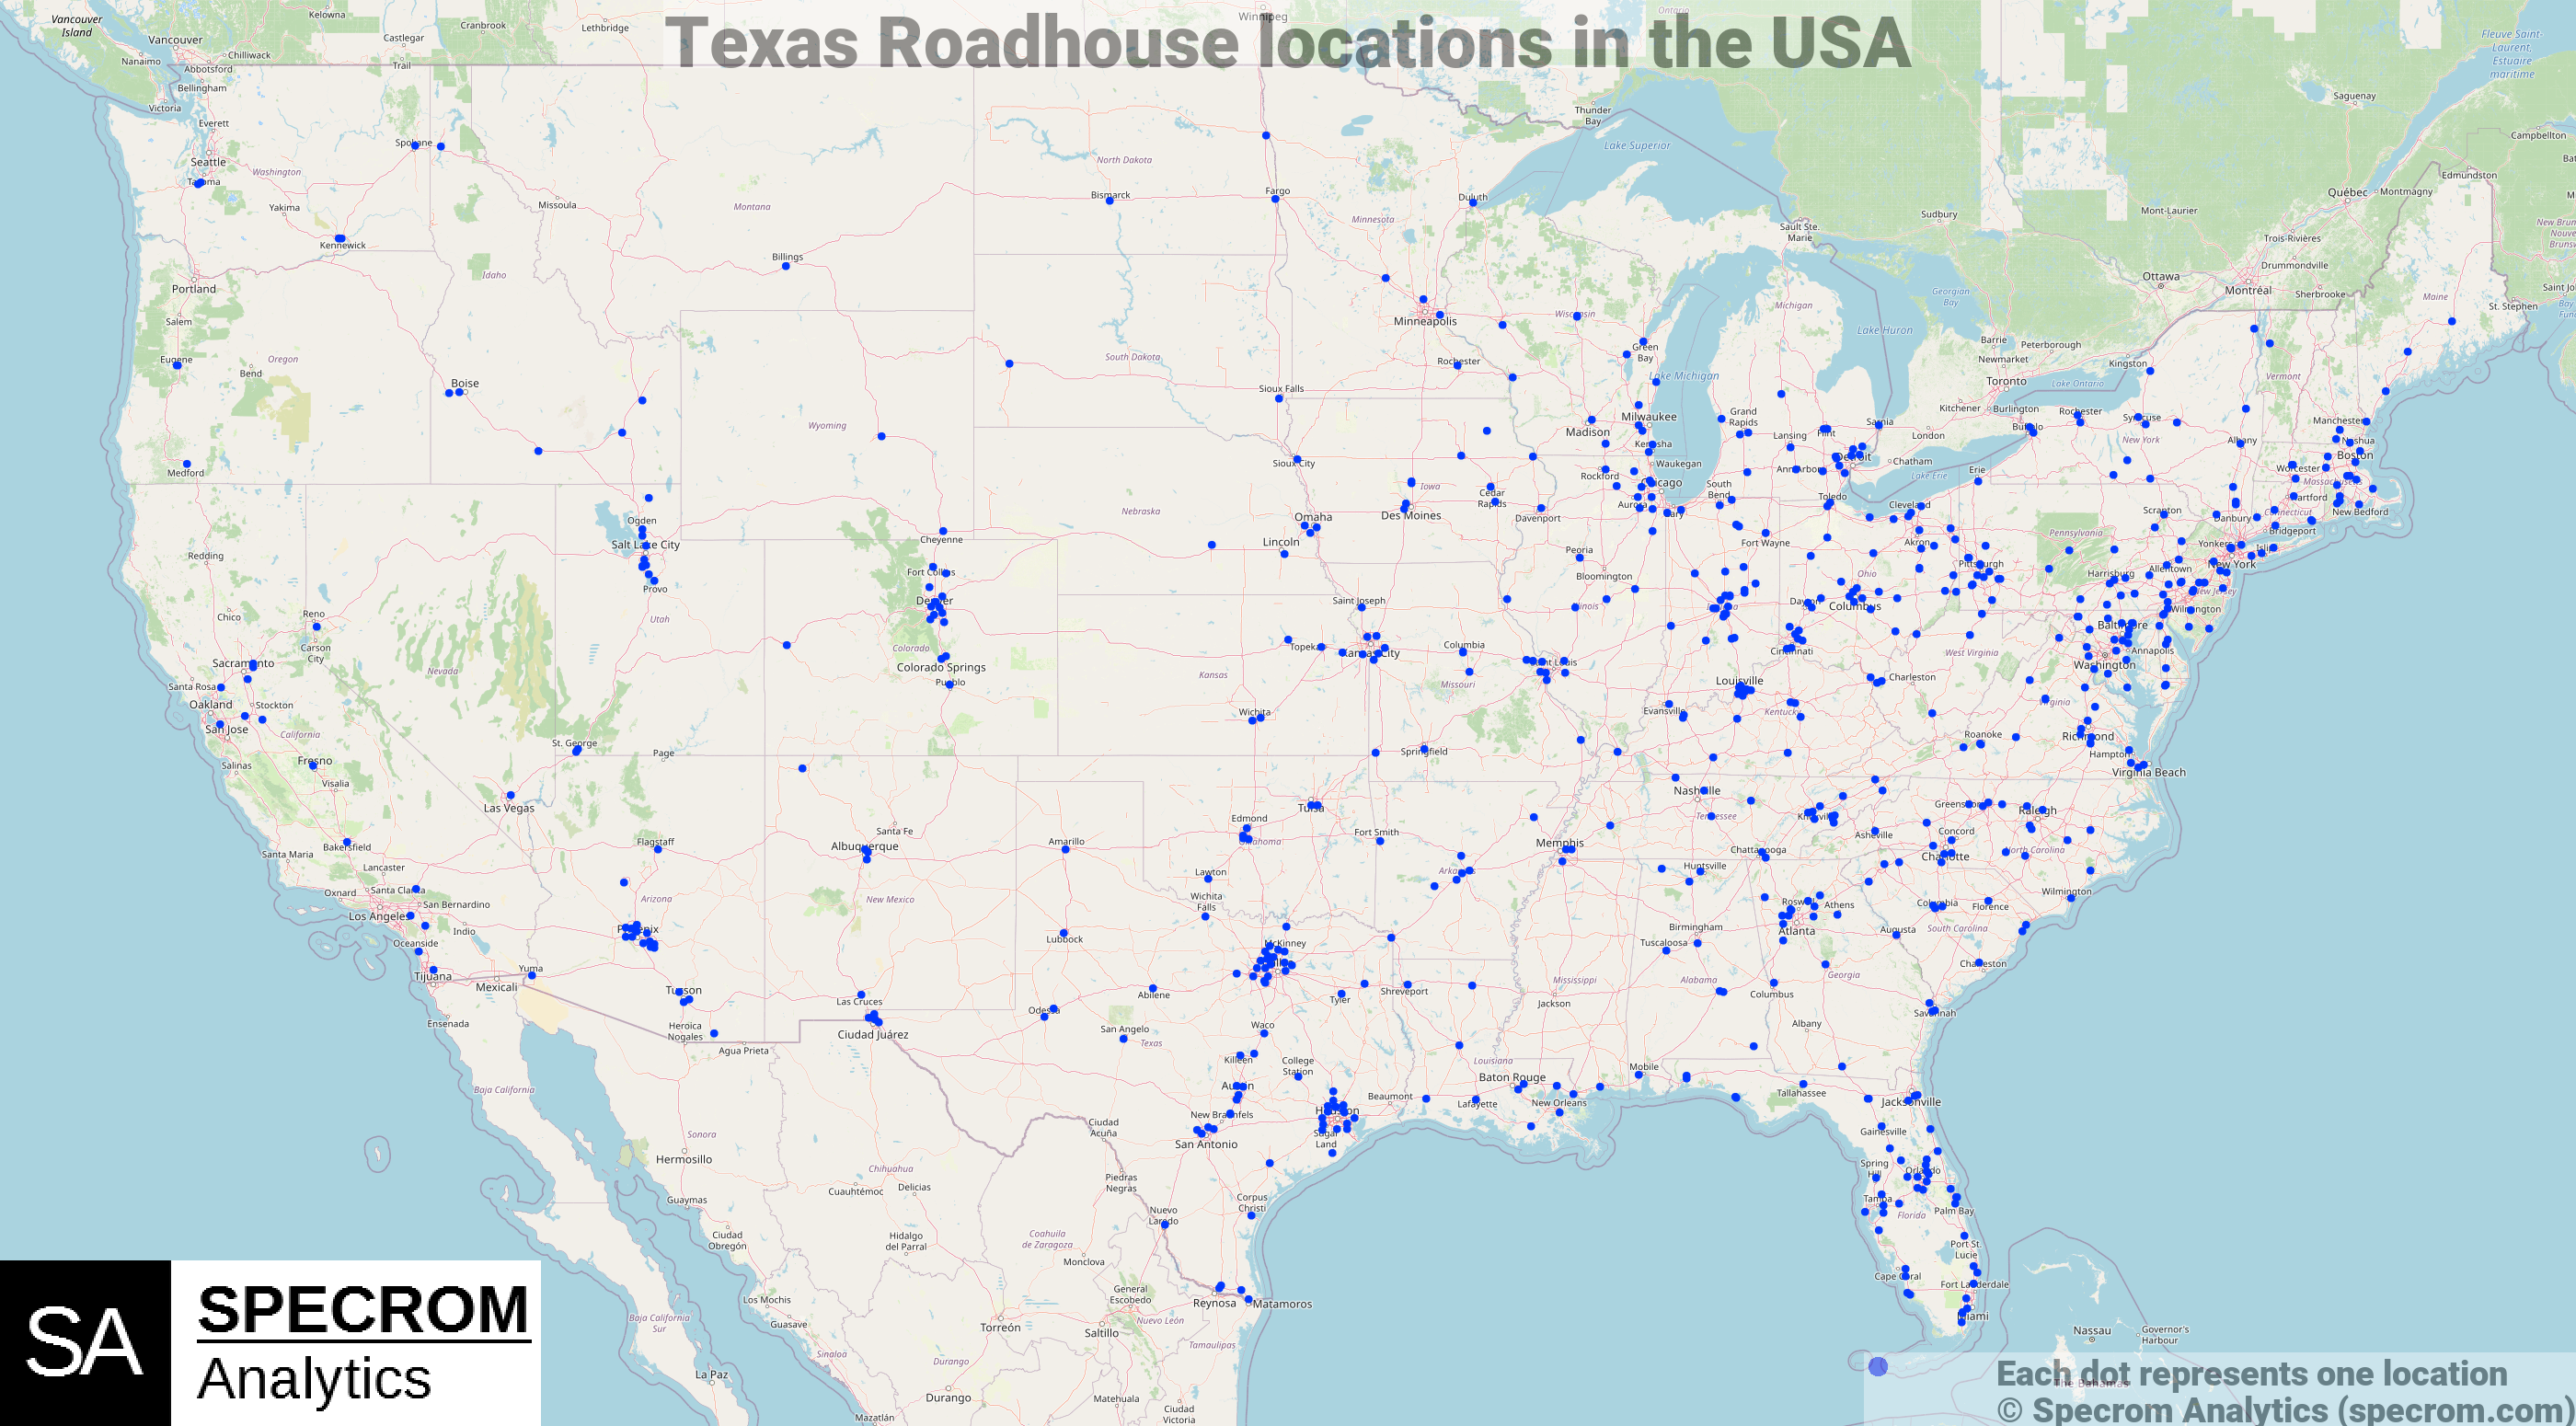 Texas Roadhouse locations in the USA